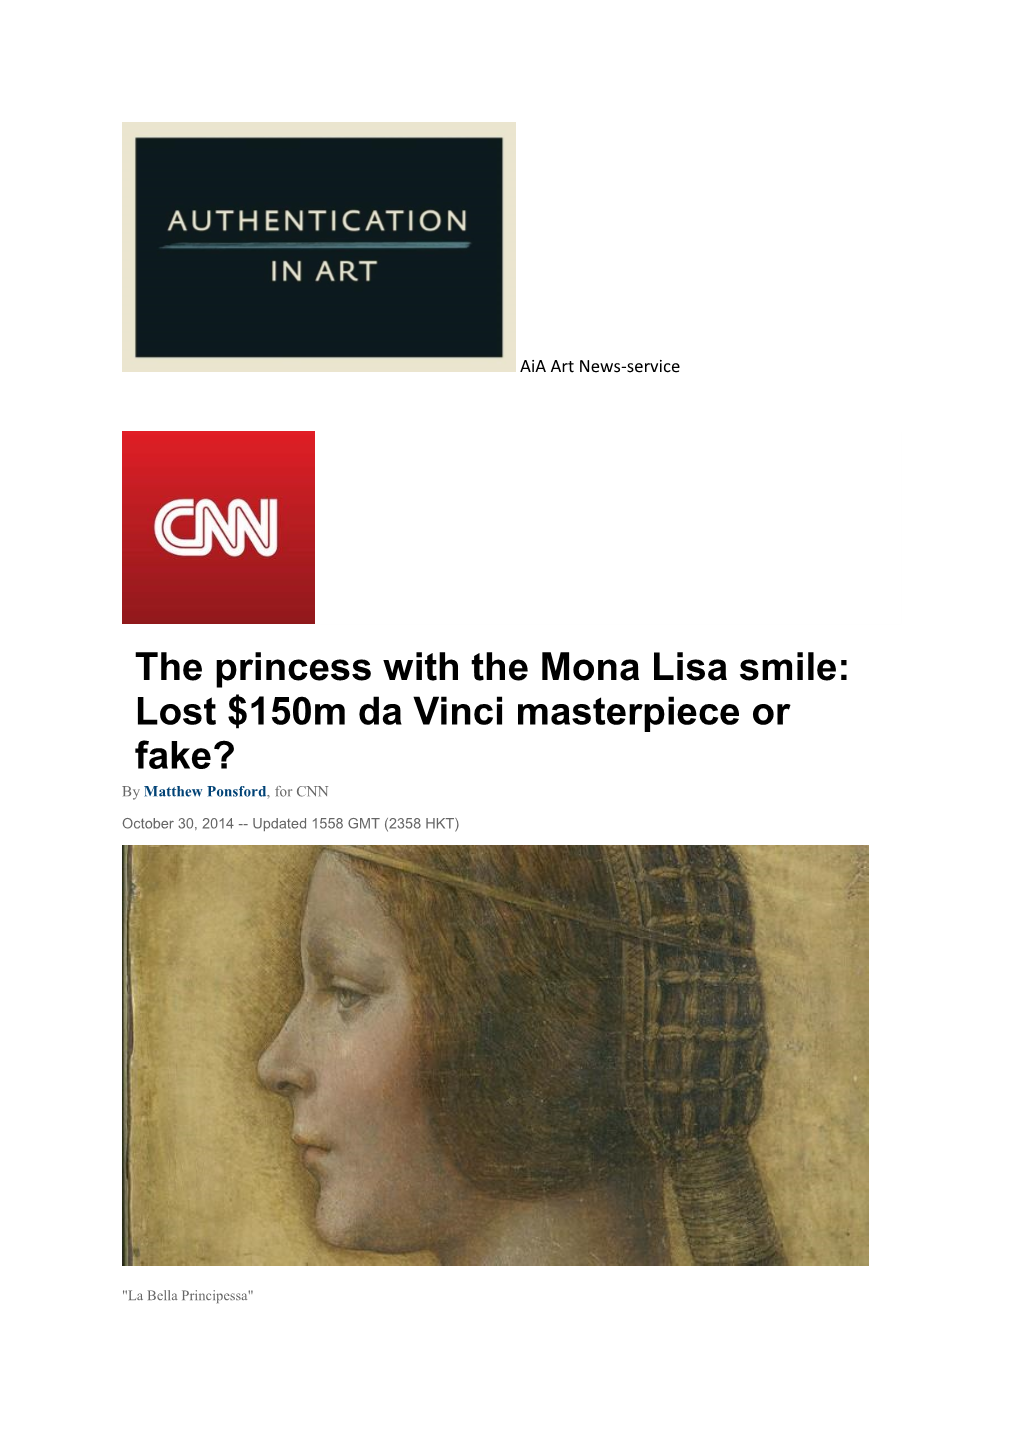 The Princess with the Mona Lisa Smile: Lost $150M Da Vinci Masterpiece Or Fake? by Matthew Ponsford, for CNN